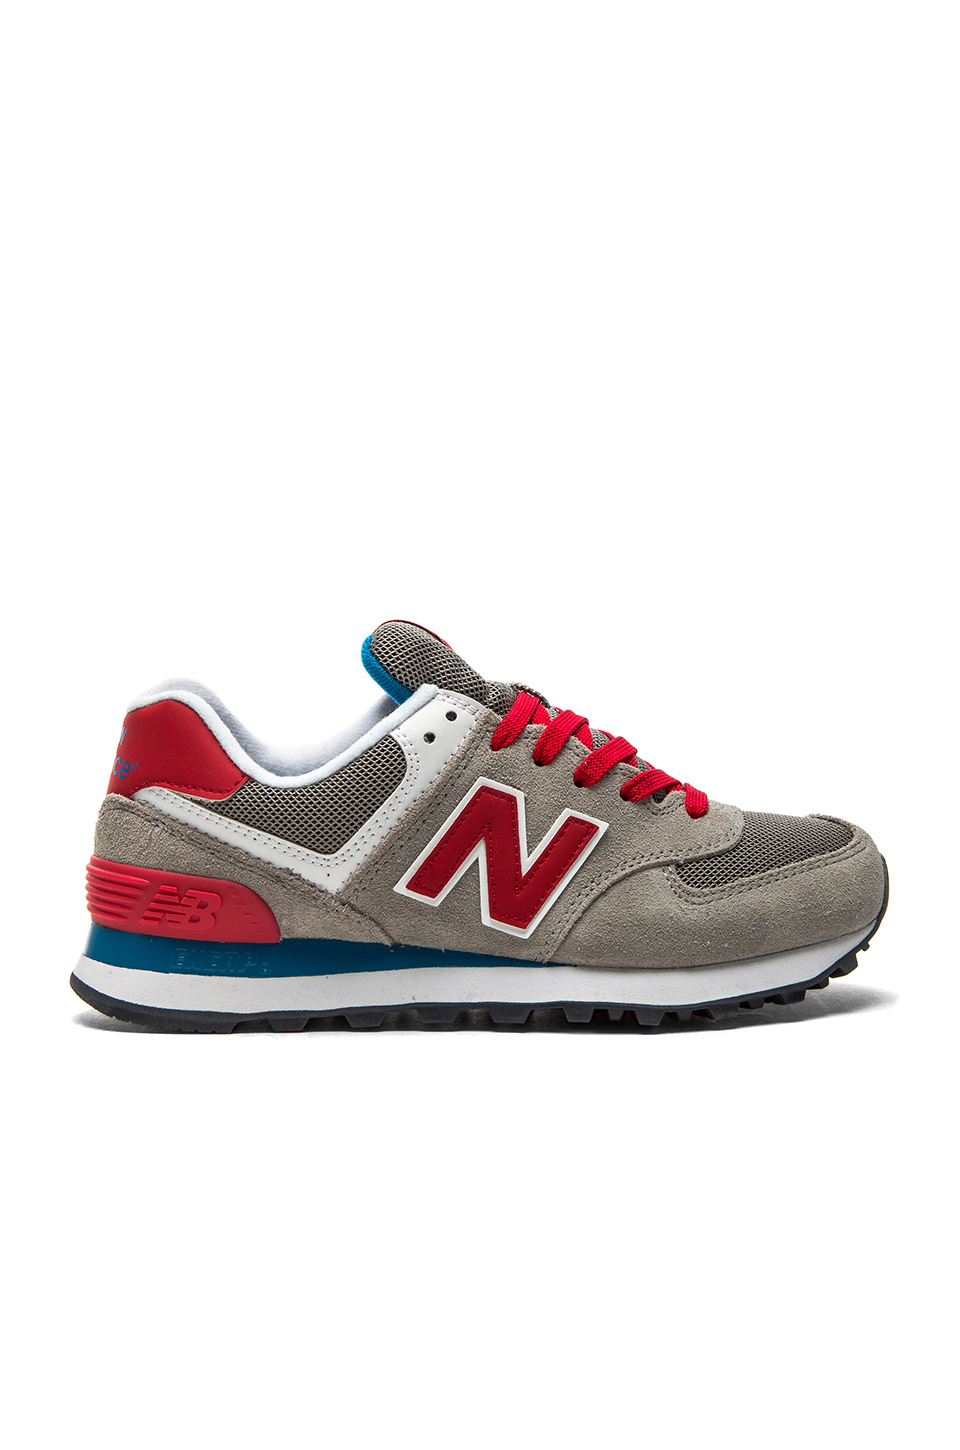 New Balance 574 Core Plus Collection Sneaker in Gray - Lyst